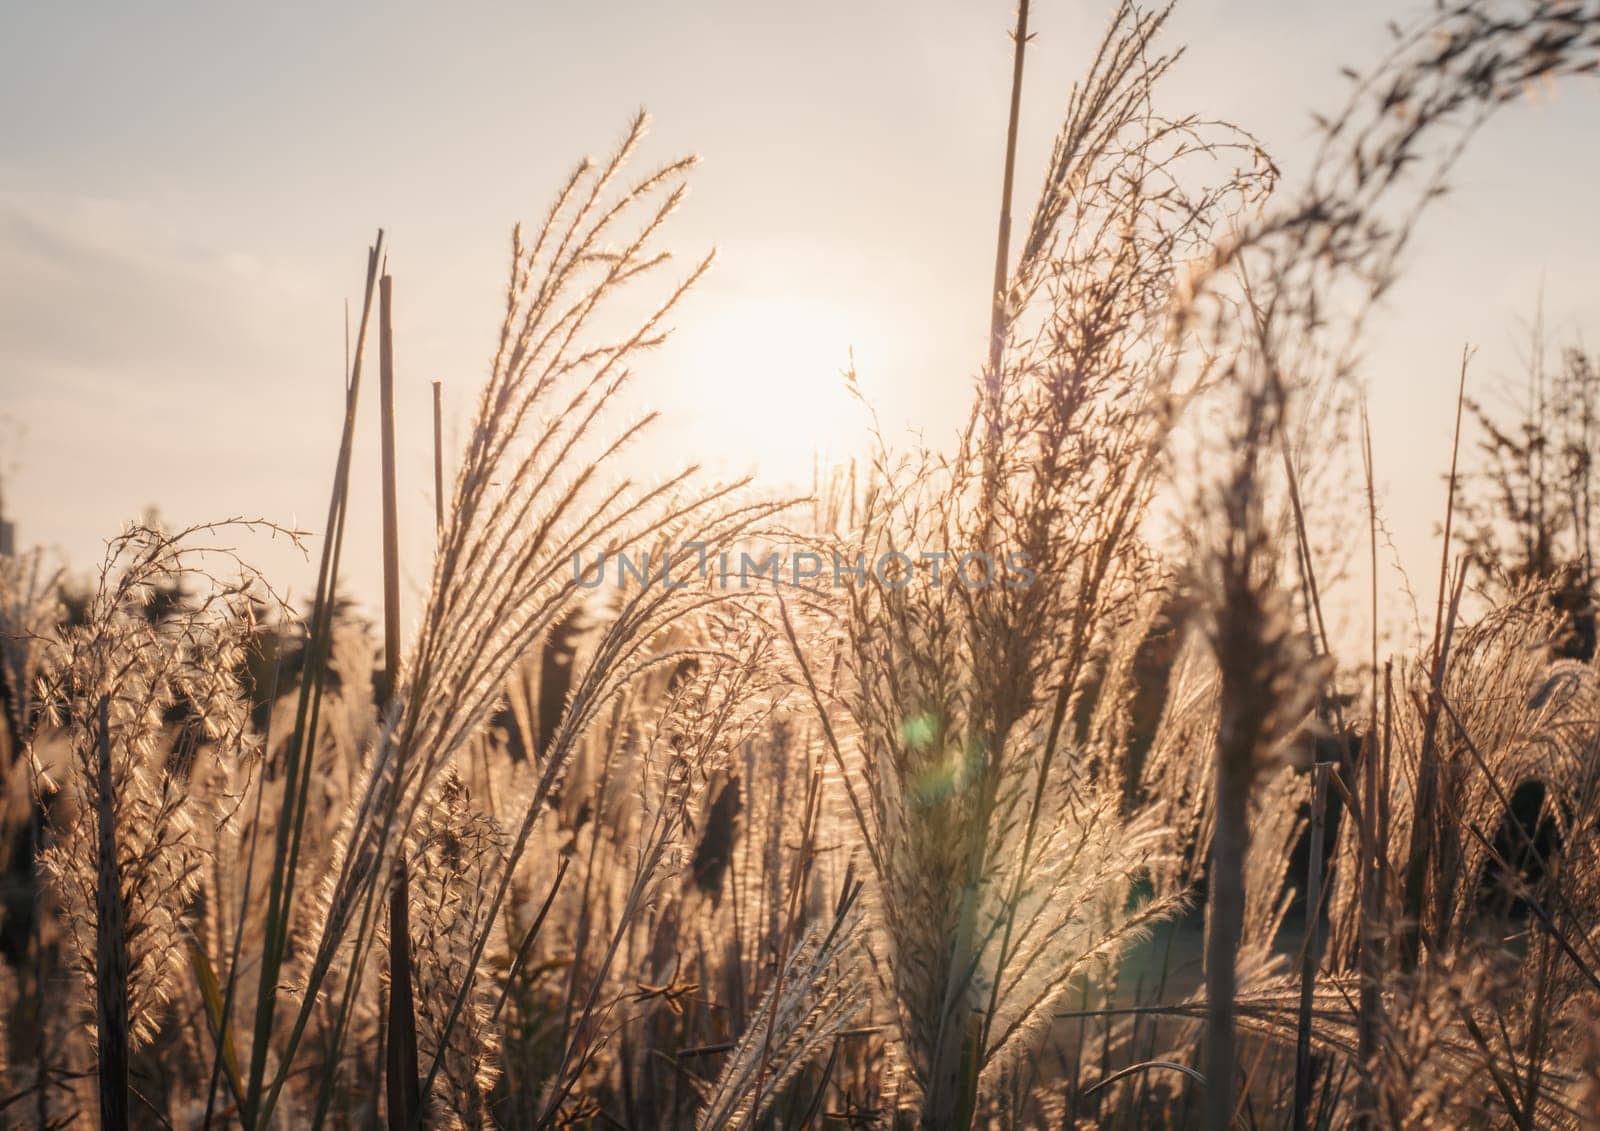 Golden wheat stalks gently sway in the wind as the setting sun casts a warm, golden glow. The serene rural landscape evokes a sense of calm and tranquility.